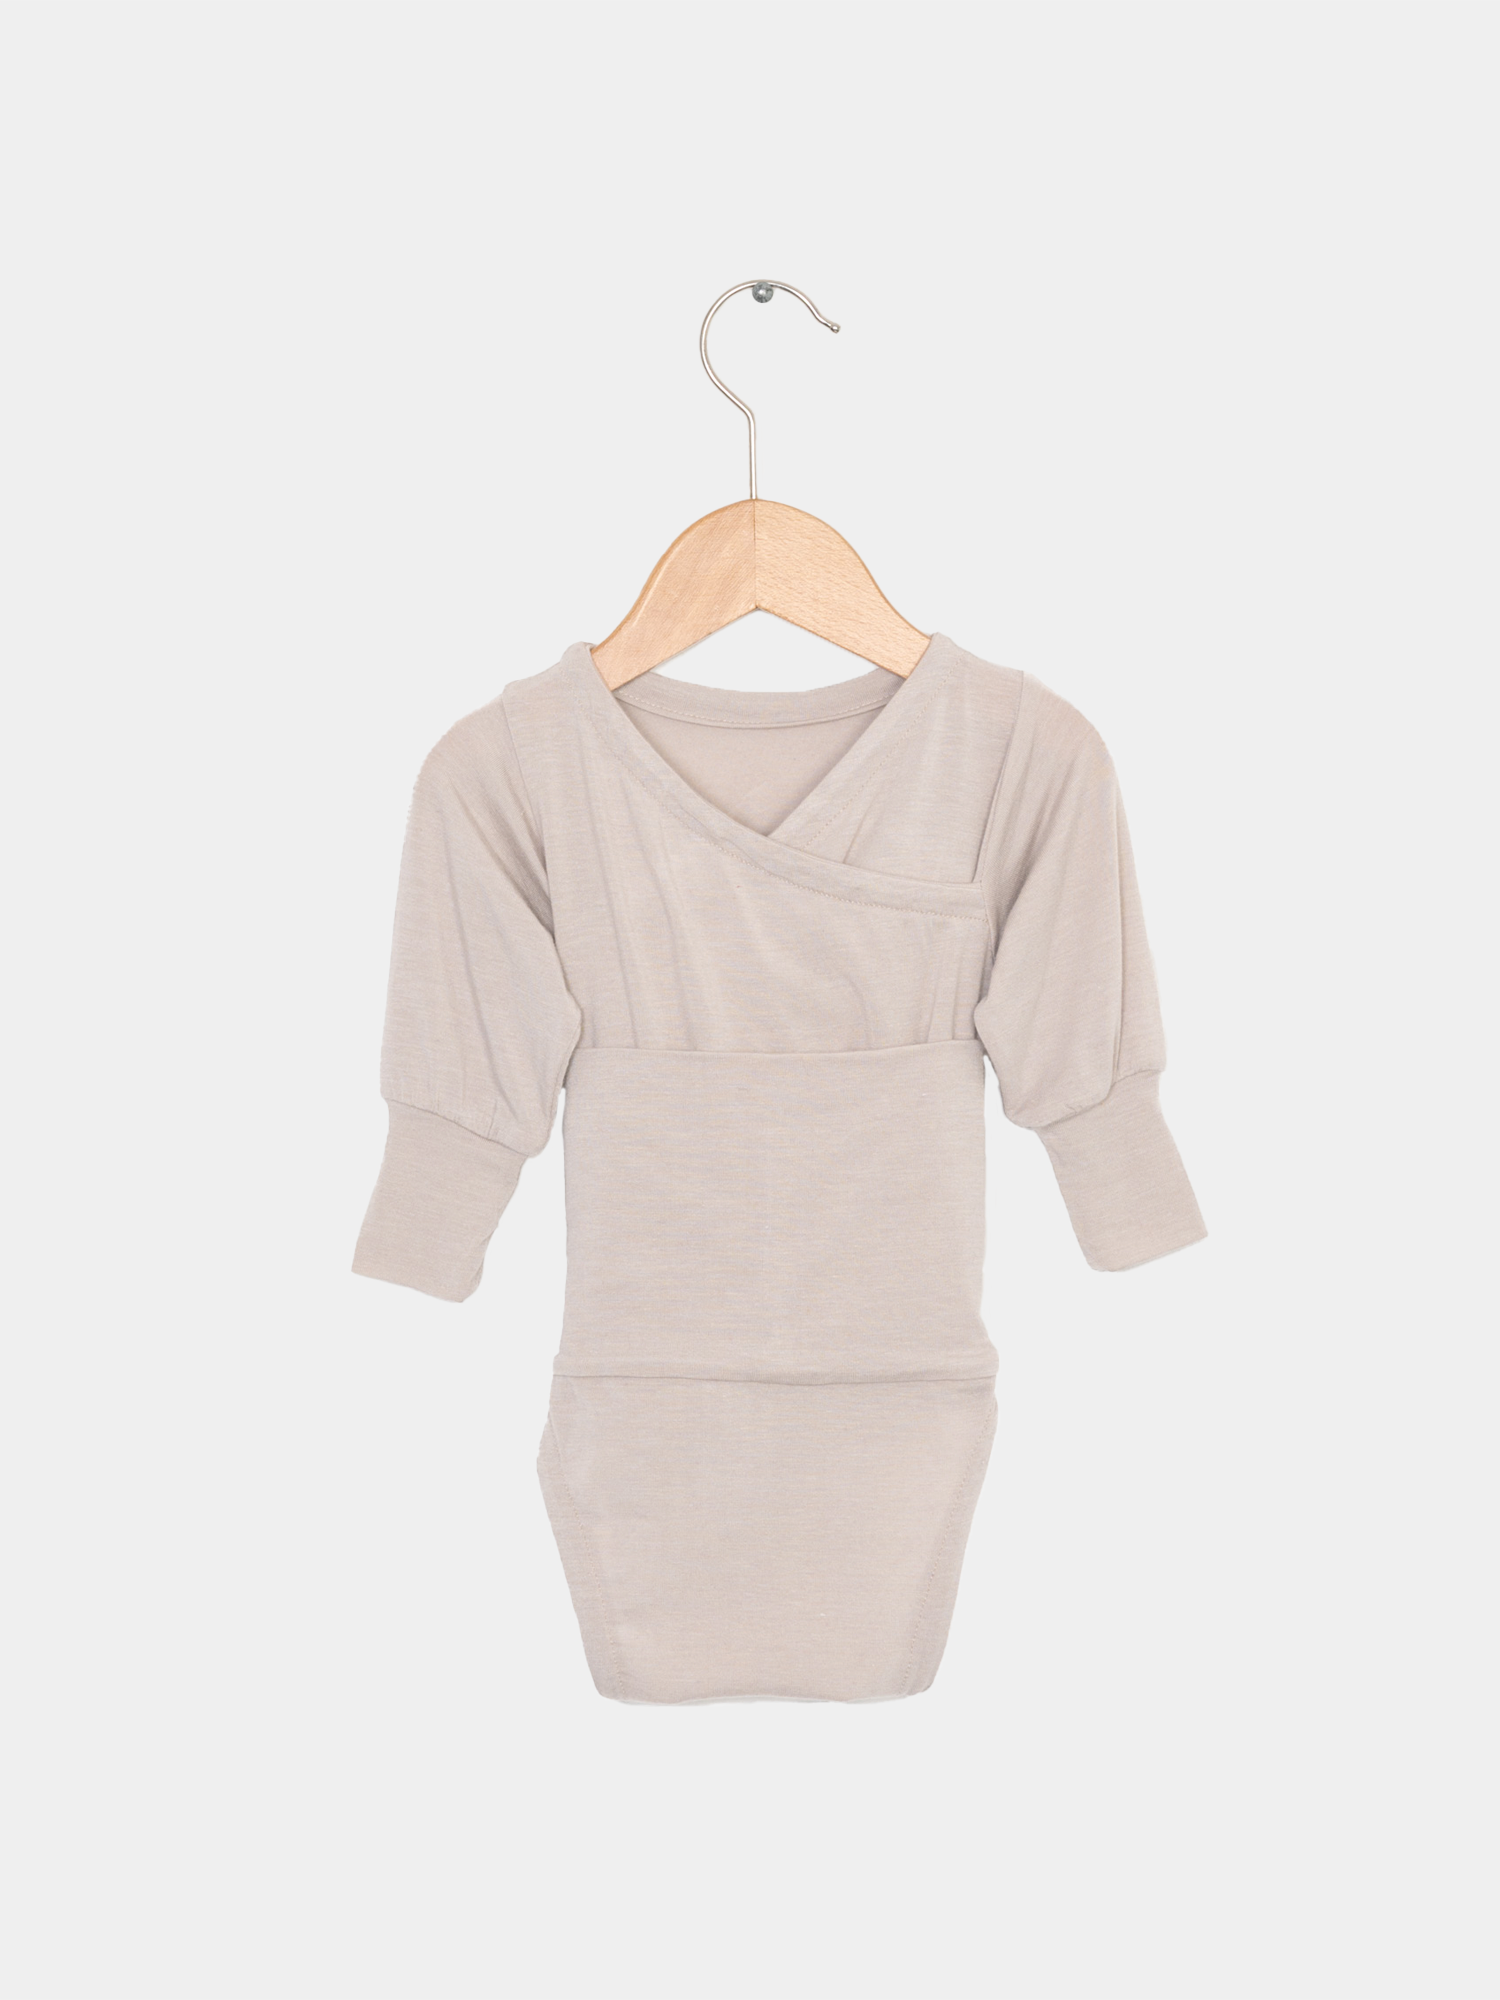 Loopbody cashmere blend - growing baby bodysuit - sand